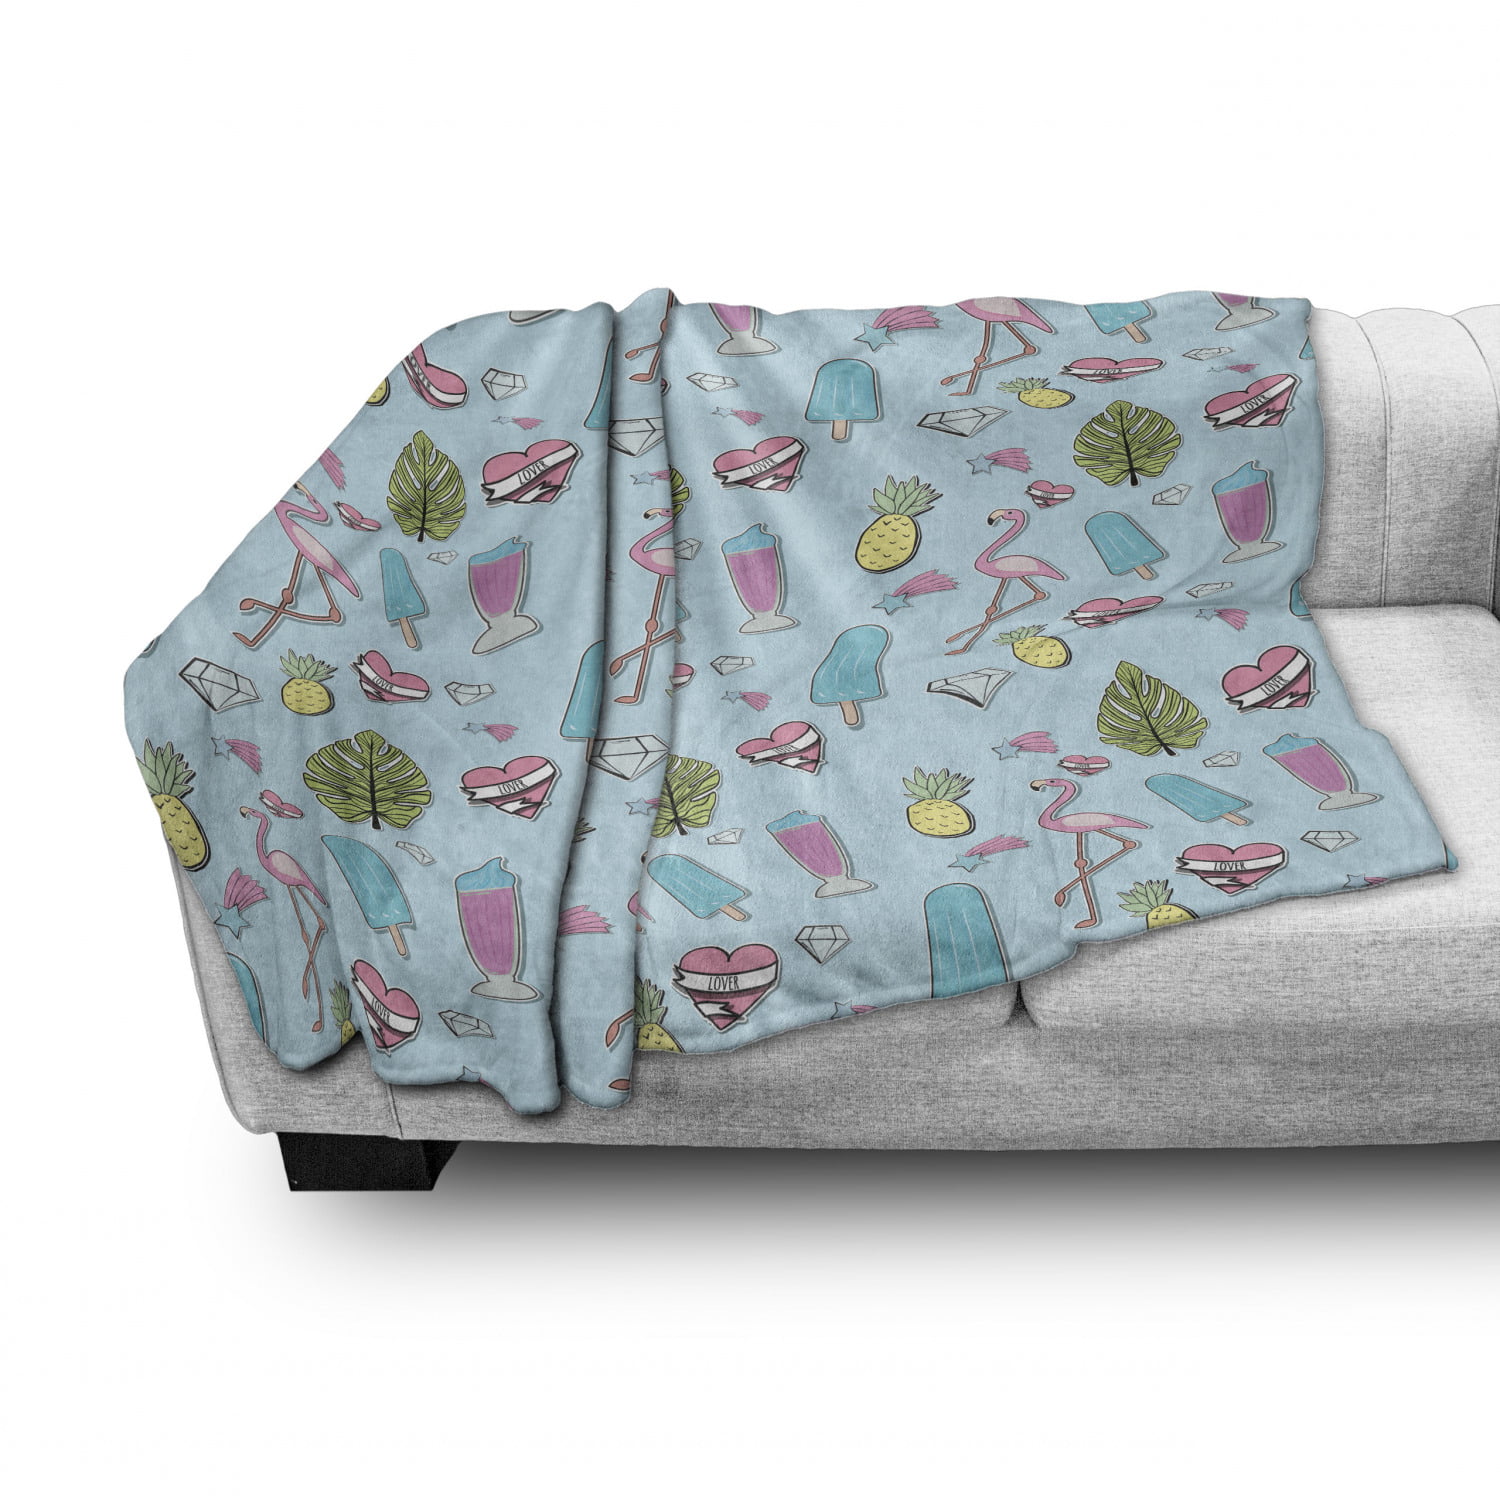 Flannel Fleece Accent Piece Soft Couch Cover for Adults Ambesonne Summer Throw Blanket Pale Blue Multicolor Repeating Fun Items of Popsicle Flamingo Pineapple Diamond Heart Star Leaf 50 x 70